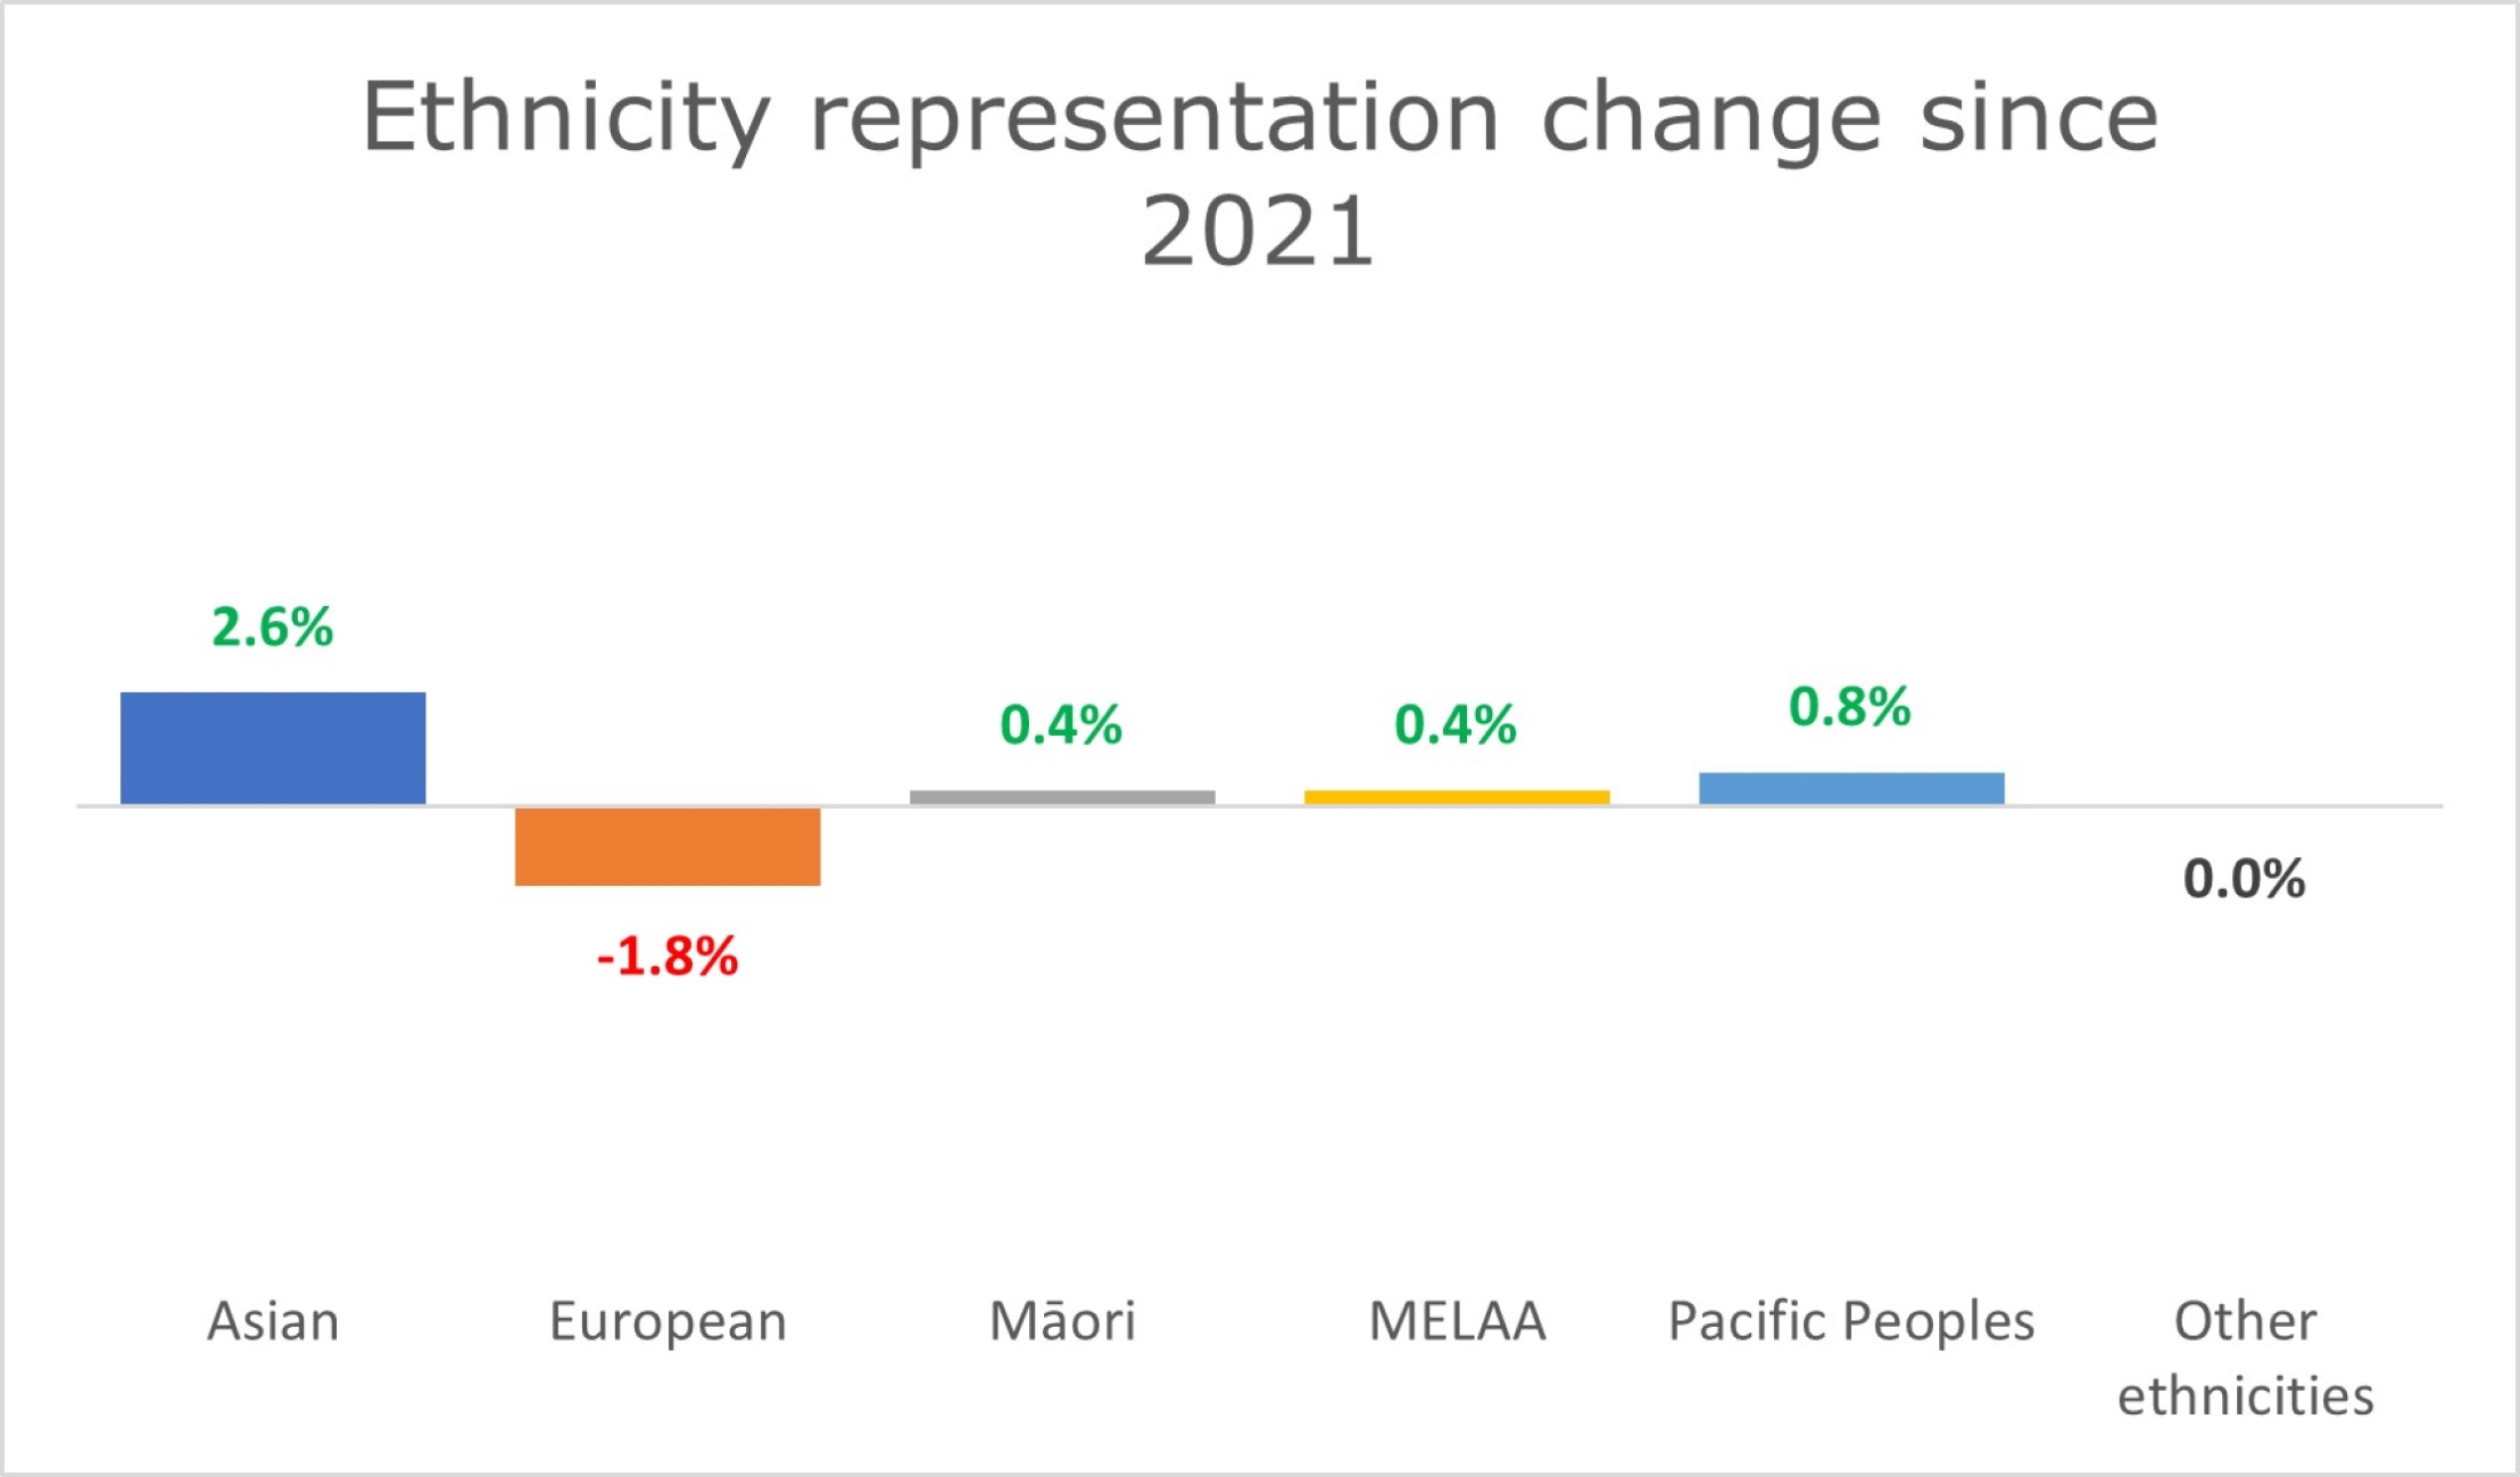 Bar graph showing ethnicity representation change since 2021. The horizontal axis shows ethnicities. The bar graph represents the changes from 2021 to 2022.